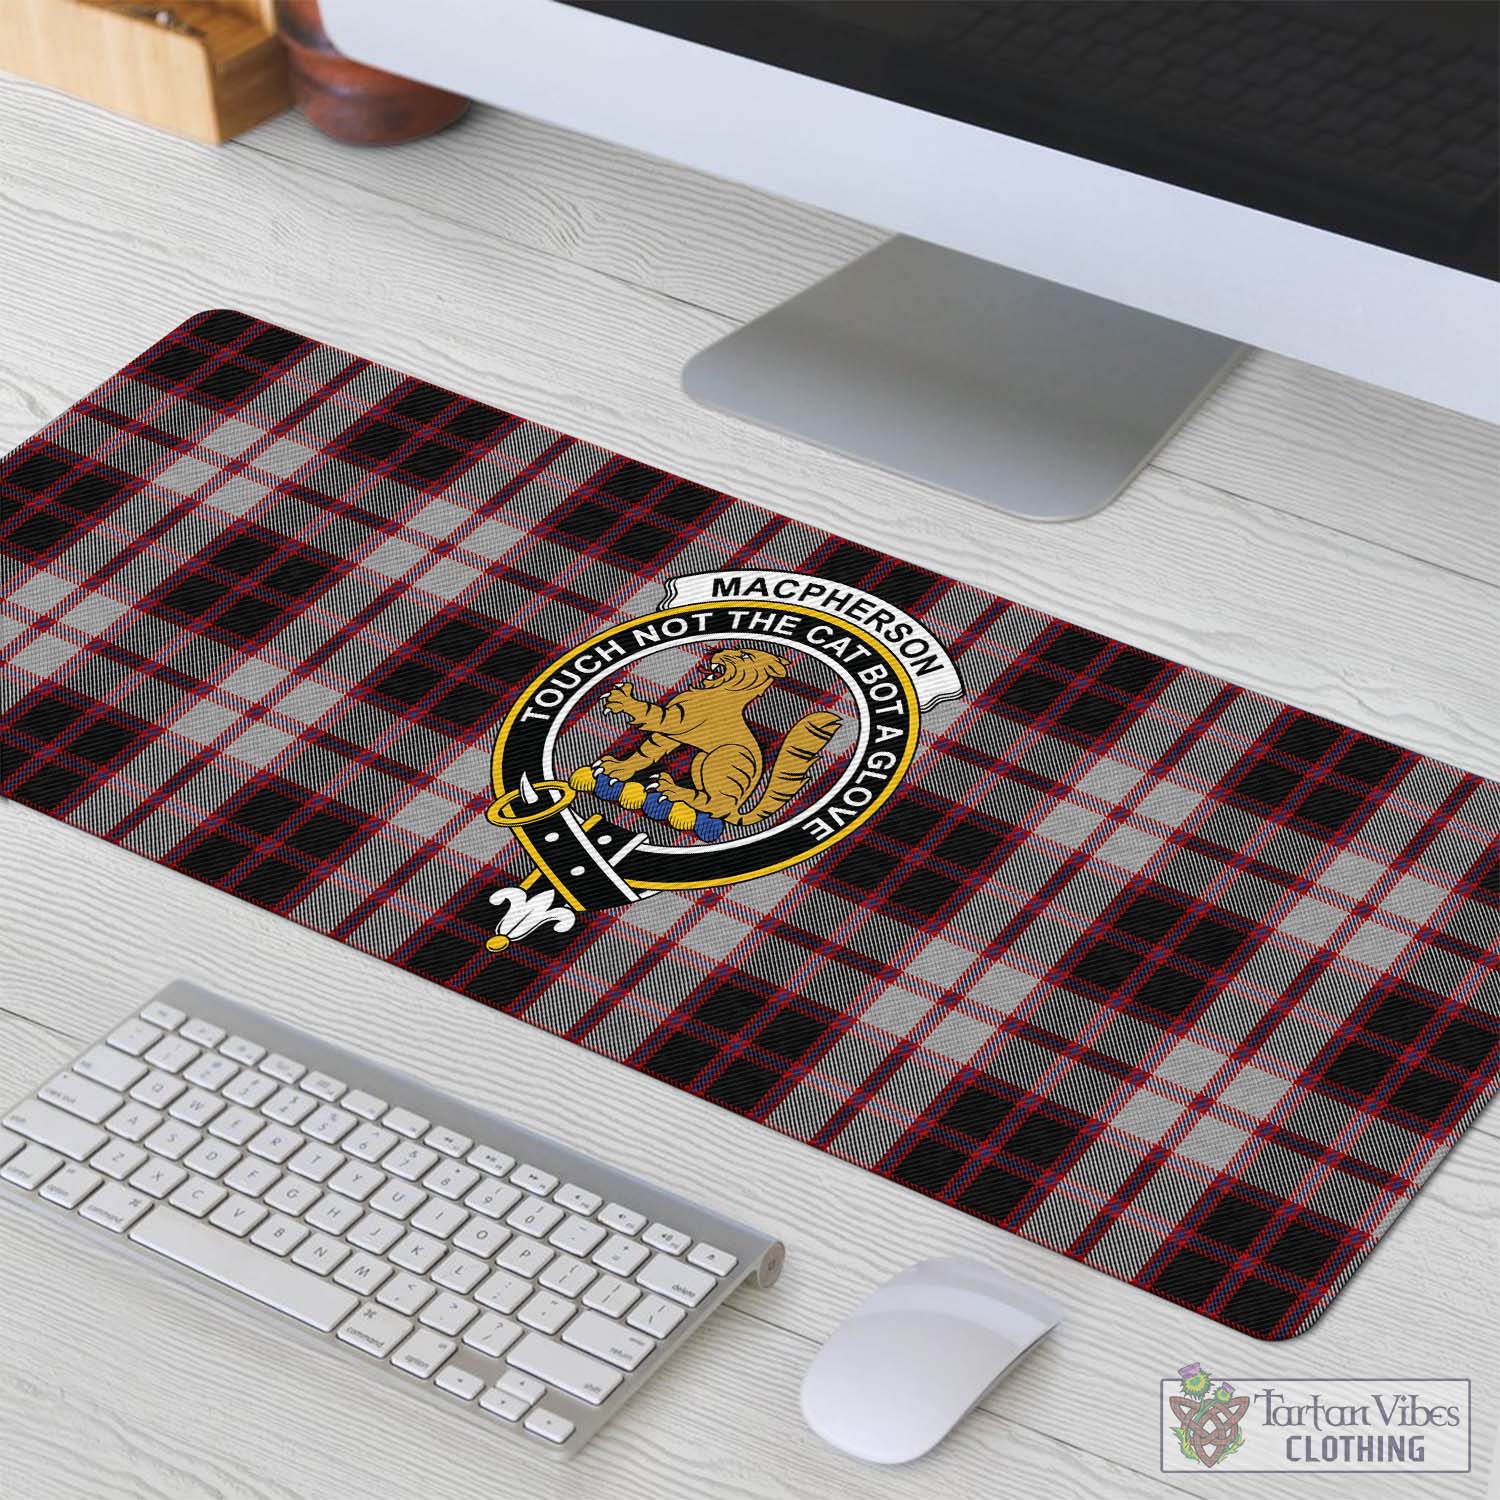 Tartan Vibes Clothing MacPherson Tartan Mouse Pad with Family Crest